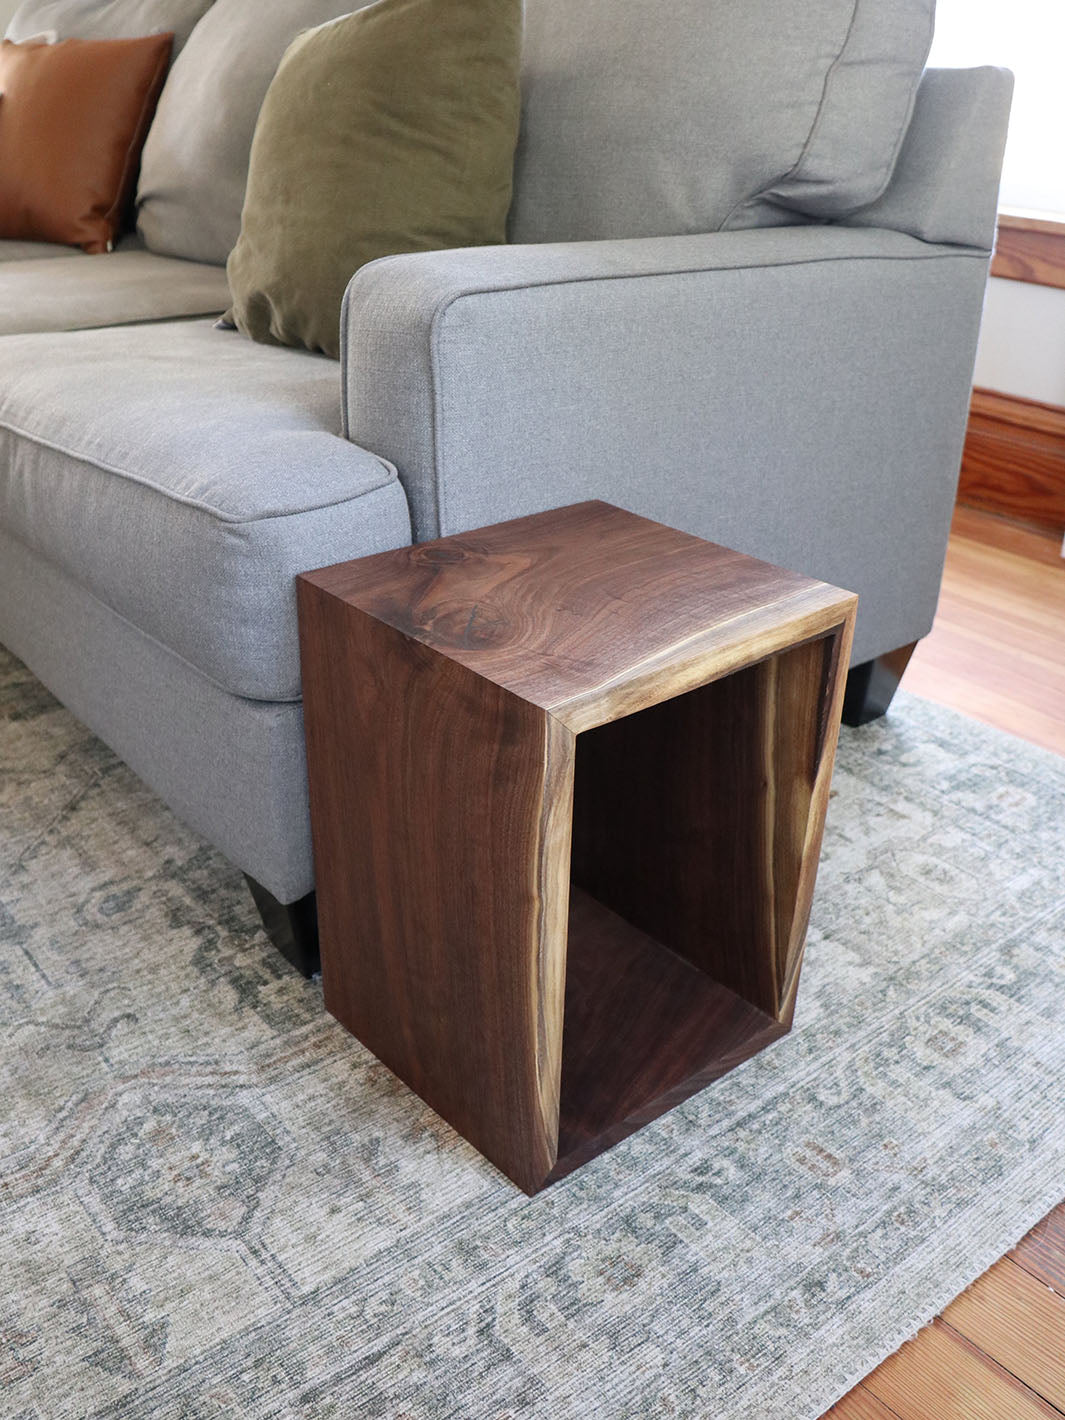 Complete Walnut Waterfall Cube Rectangle Side Table, Cuboid End Table Earthly Comfort Side Tables - 5